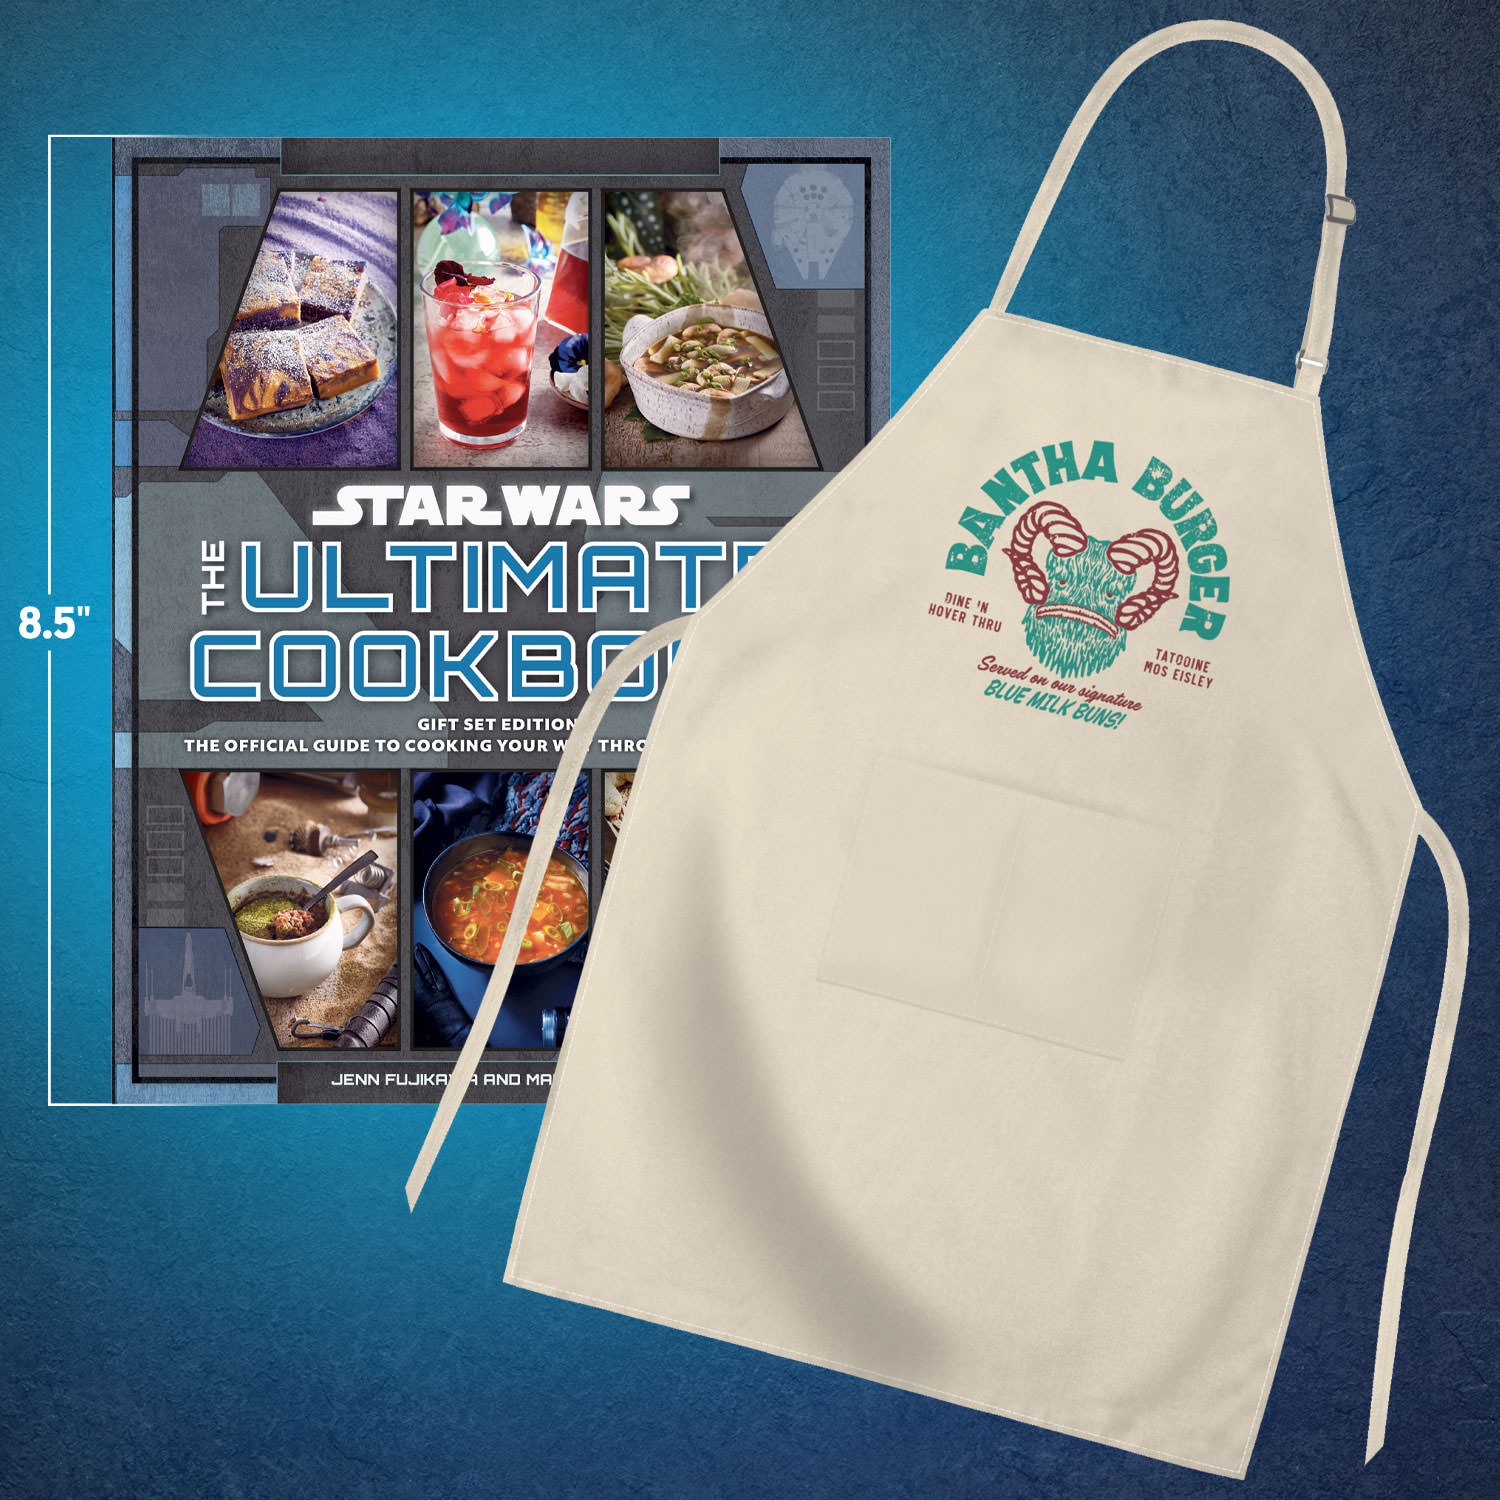 Become a Jedi Master Chef With These 'Star Wars' Kitchen Items